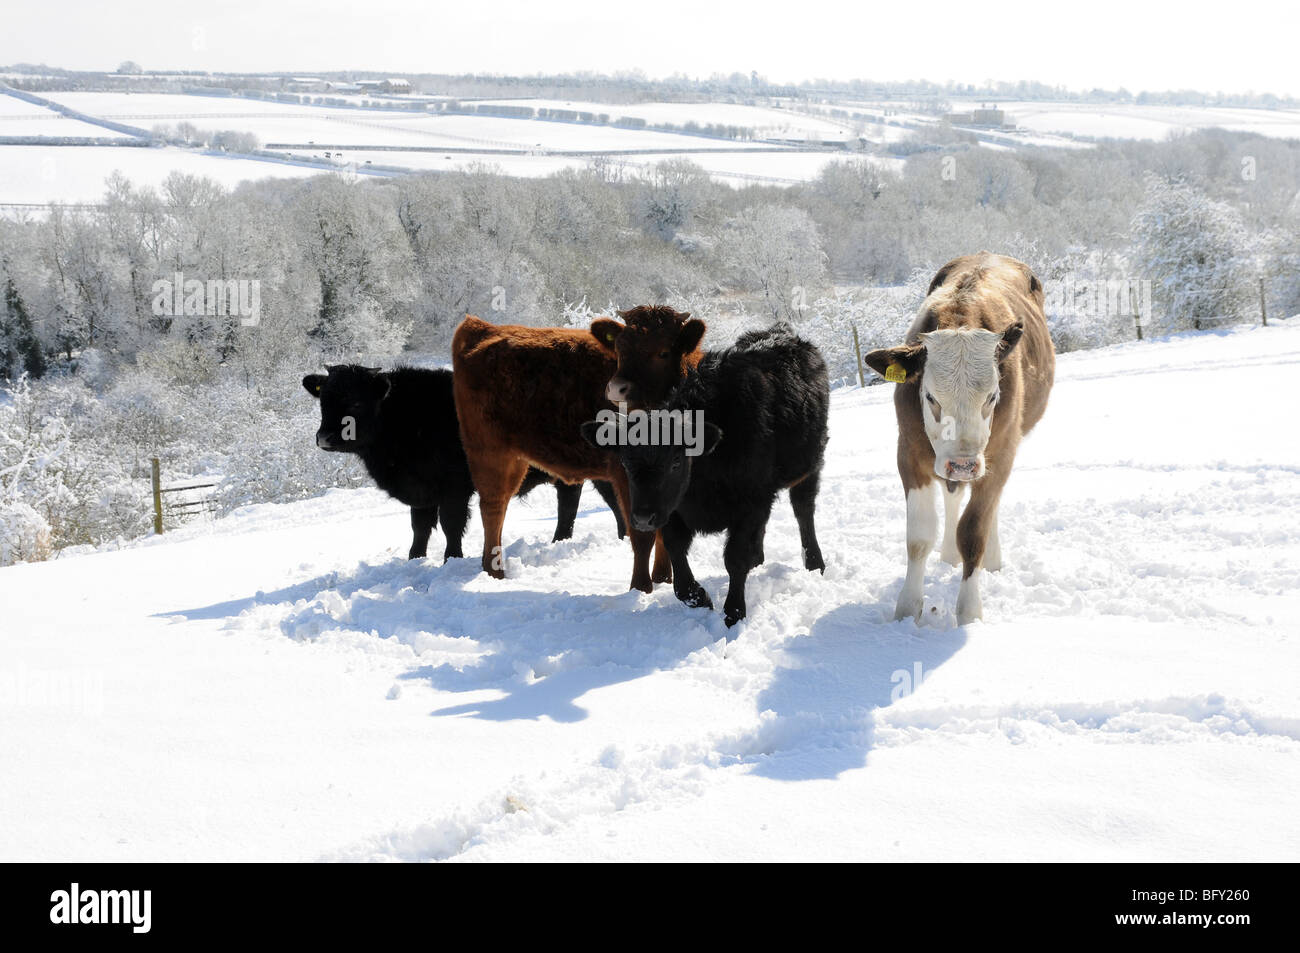 Cattle in the snow as the sun emerges Stock Photo